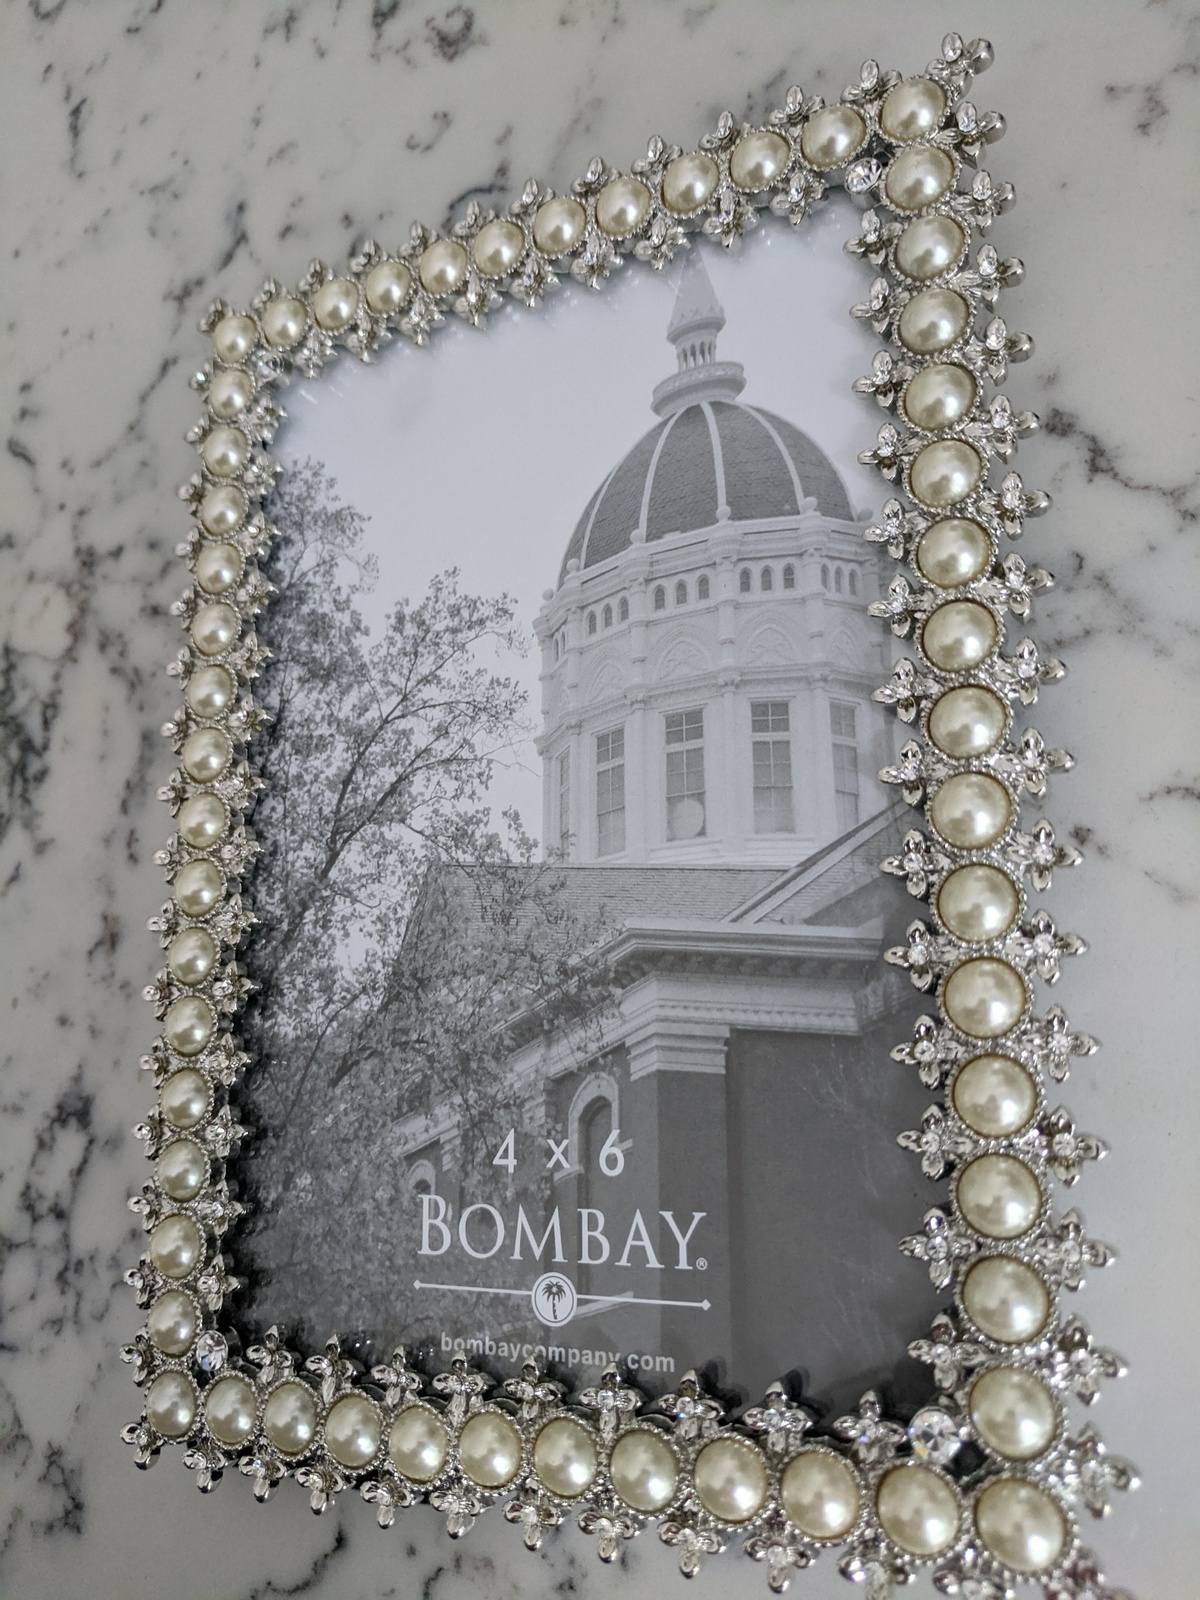 Primary image for Bombay Jeweled Pearl Heavy Metal 4x6 Photo Frame